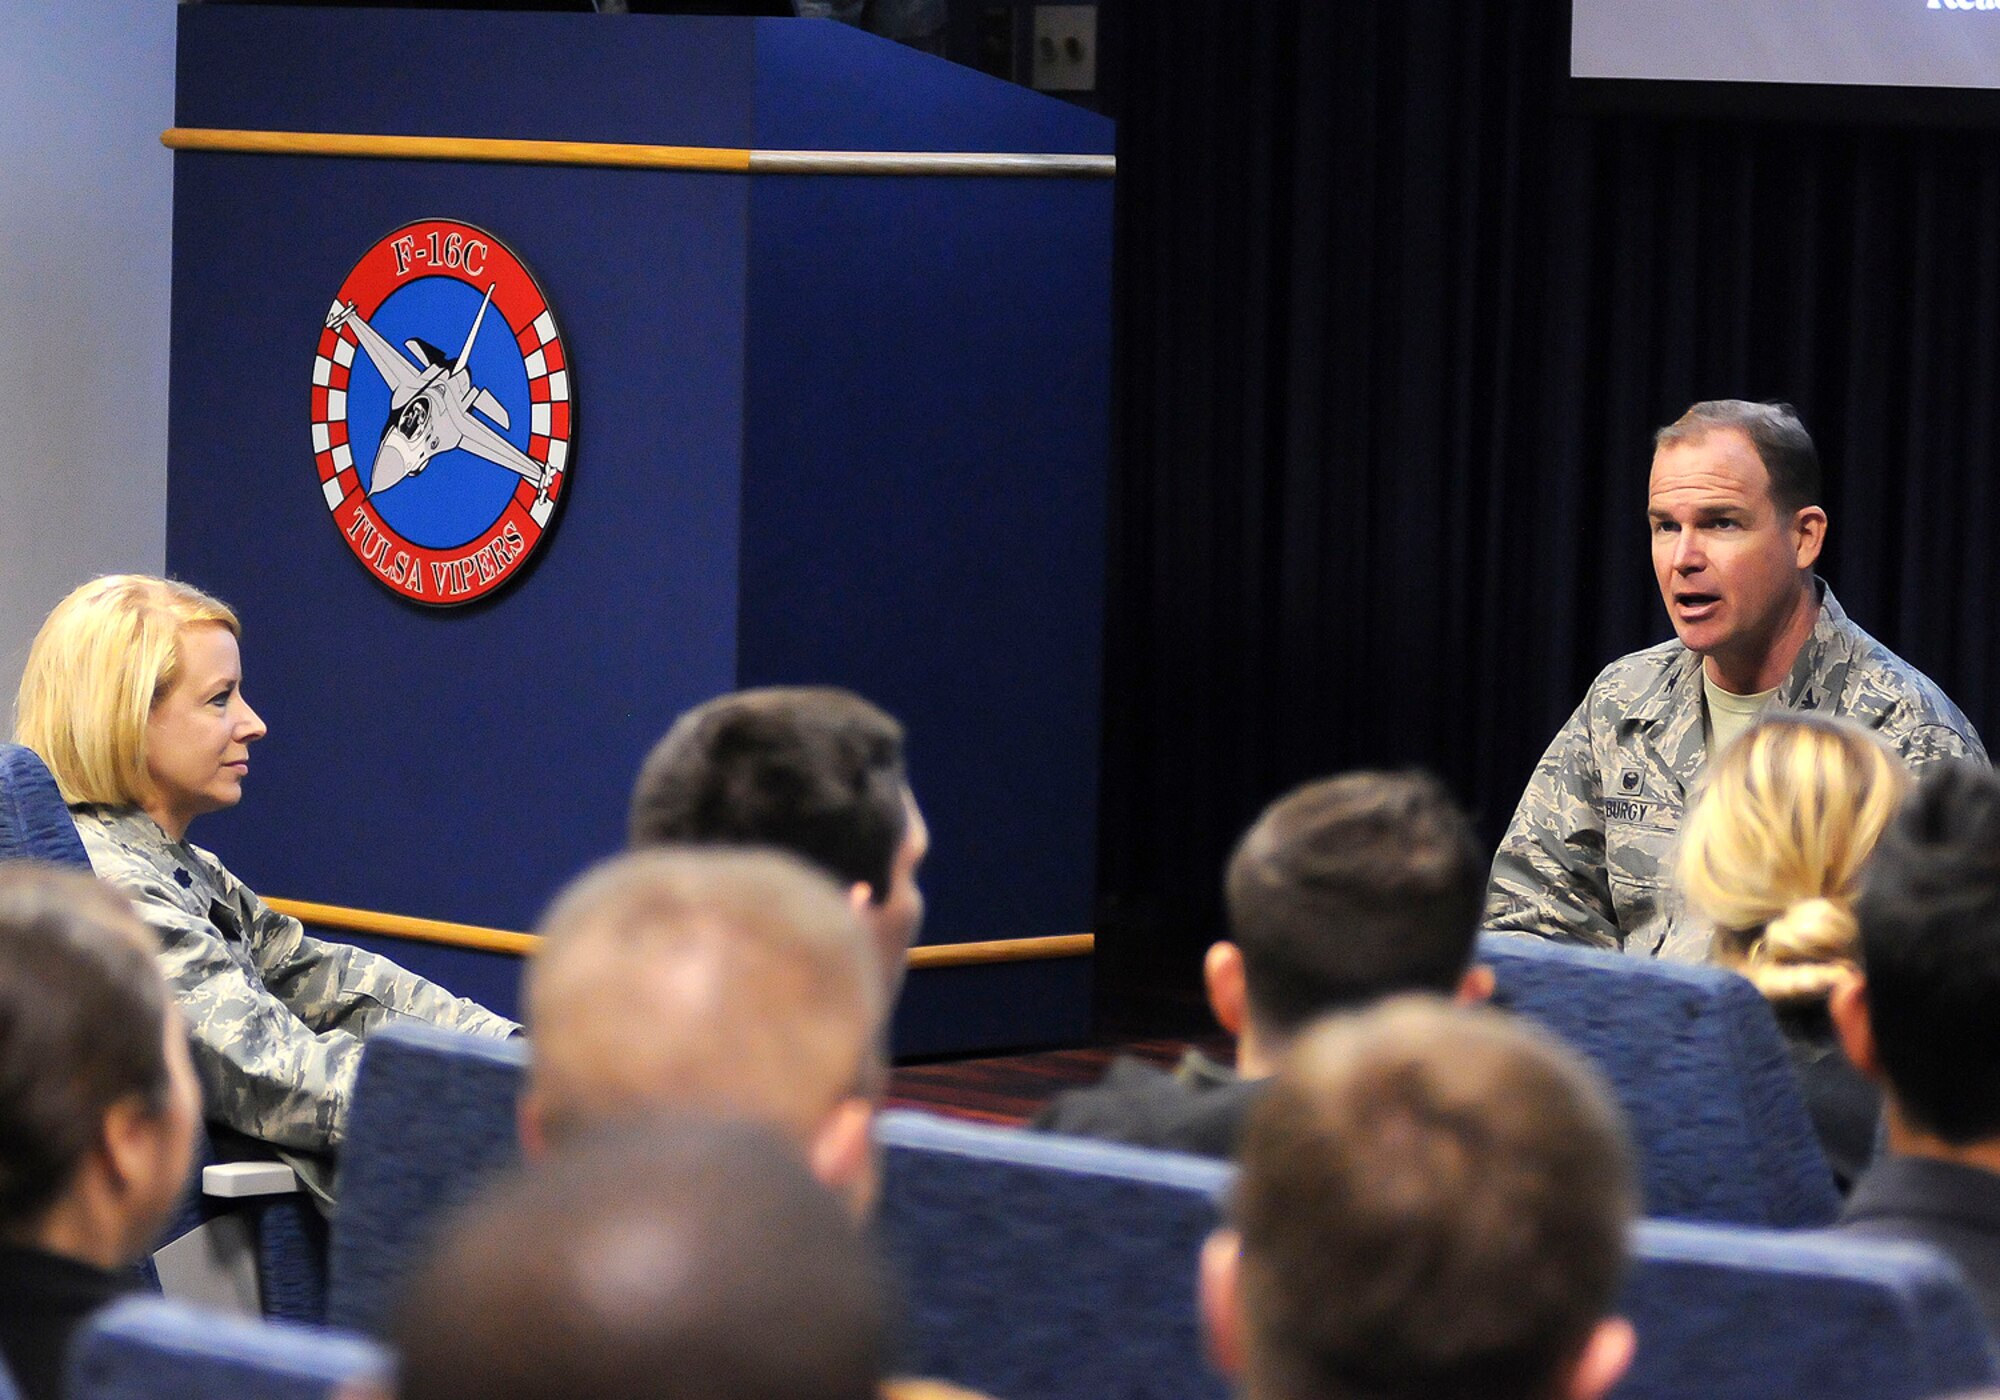 Col. David B. Burgy, 138th Fighter Wing commander, addresses airmen from the 138th Force Support Squadron during a wing commander's town hall meeting 8 March 2015, at the Tulsa Air National Guard base, Okla.   The command staff visited select units on the installation, and plan on rotating visitations throughout all the organizations during future UTA’s.  (U.S. National Guard photo by Tech. Sgt. Roberta A. Thompson/Released)